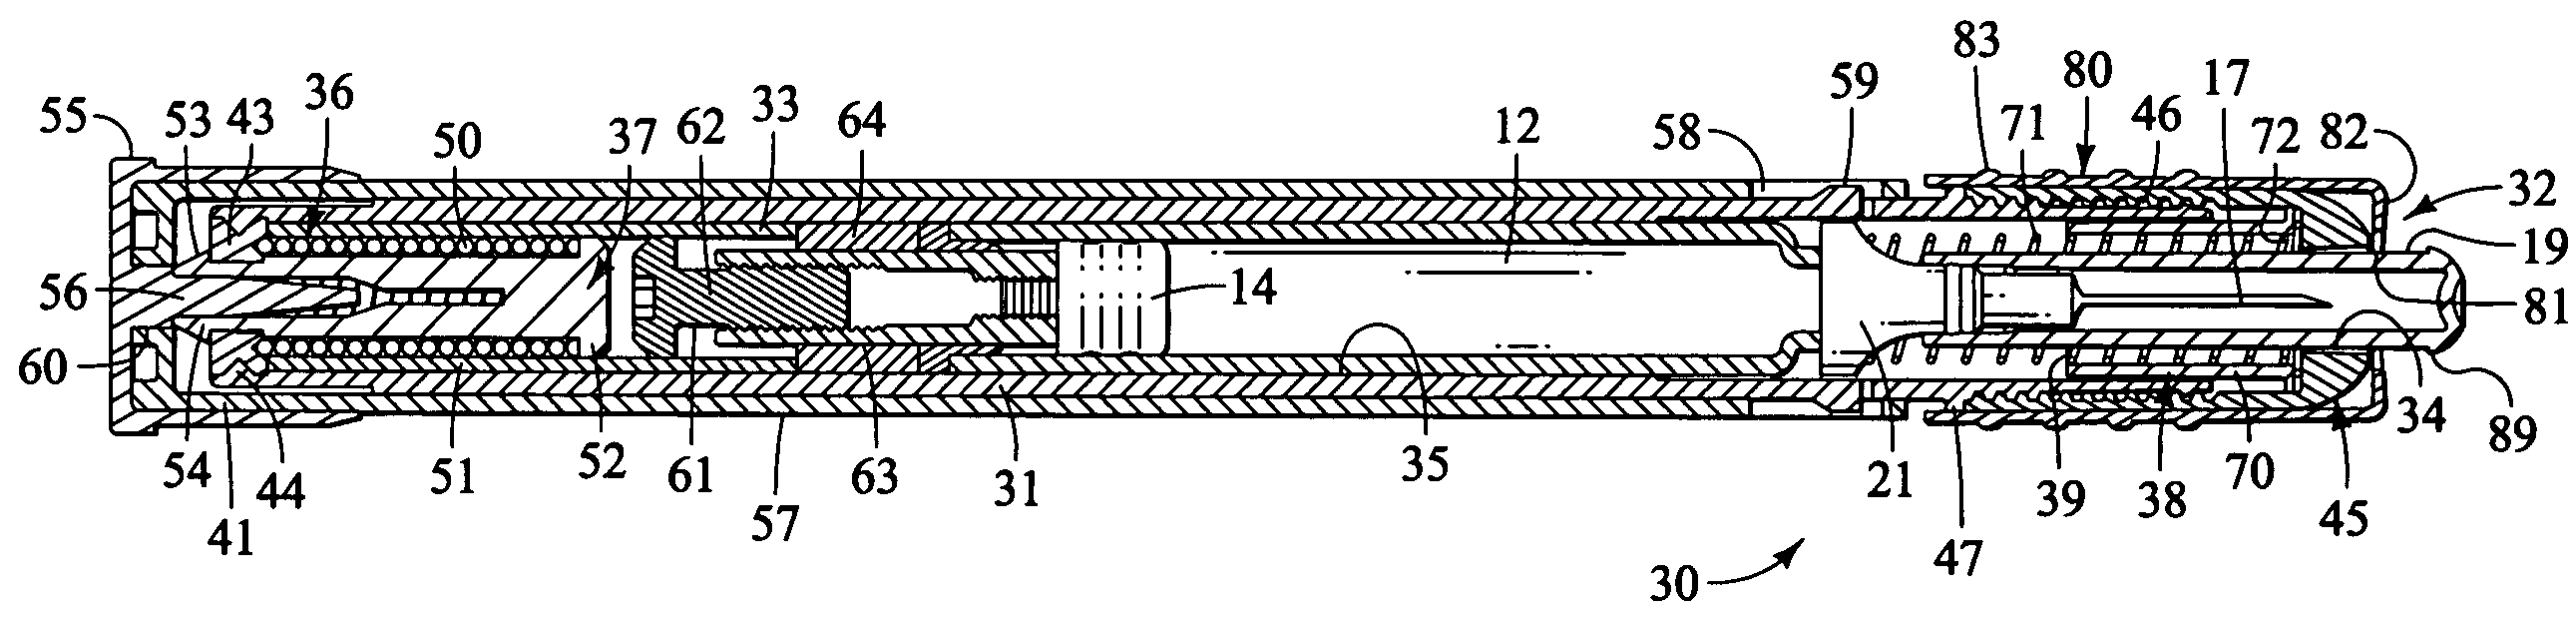 Medicine injection devices and methods